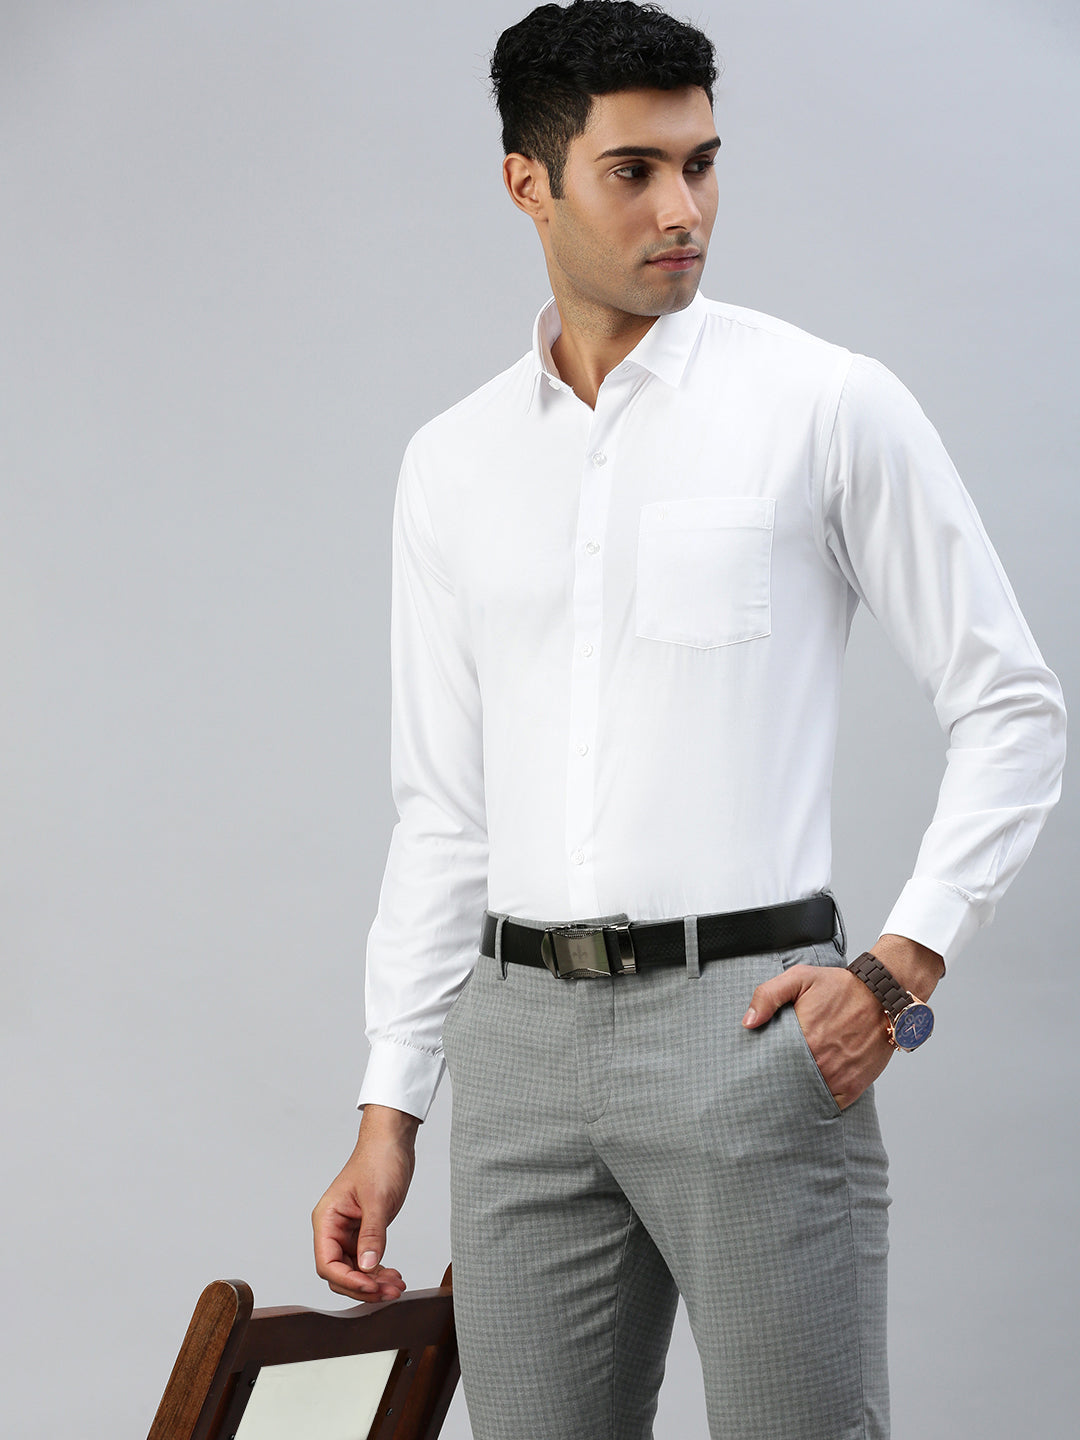 Mens Cotton White Shirt Full Sleeves Wewin New (2 Pcs Pack)